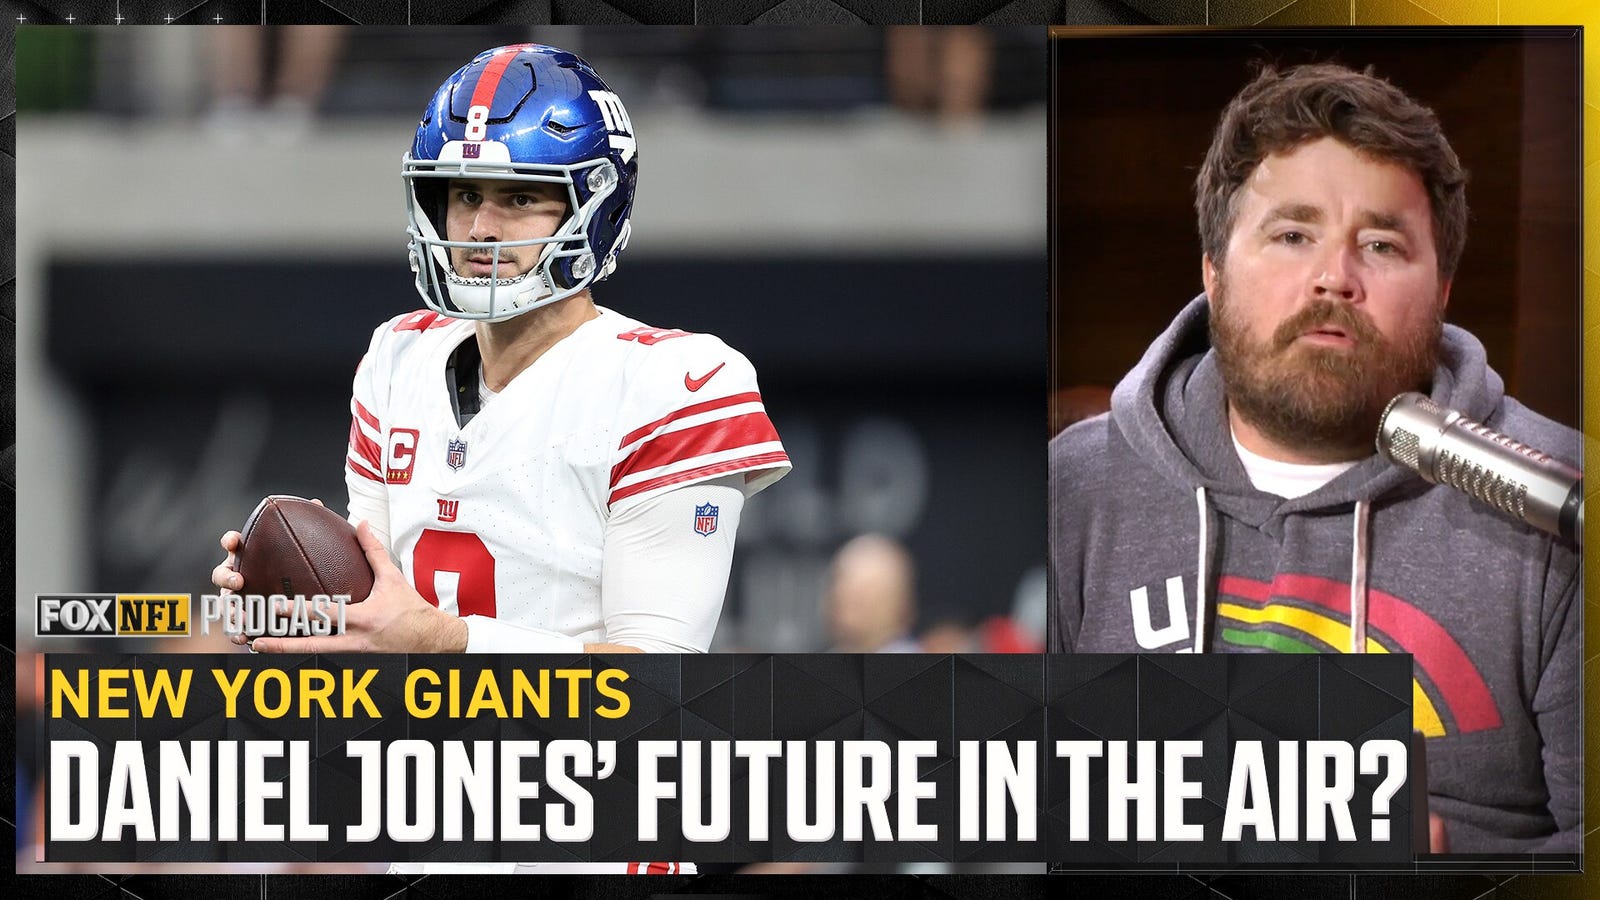 Is Daniel Jones' future with the Giants in jeopardy after torn ACL injury?